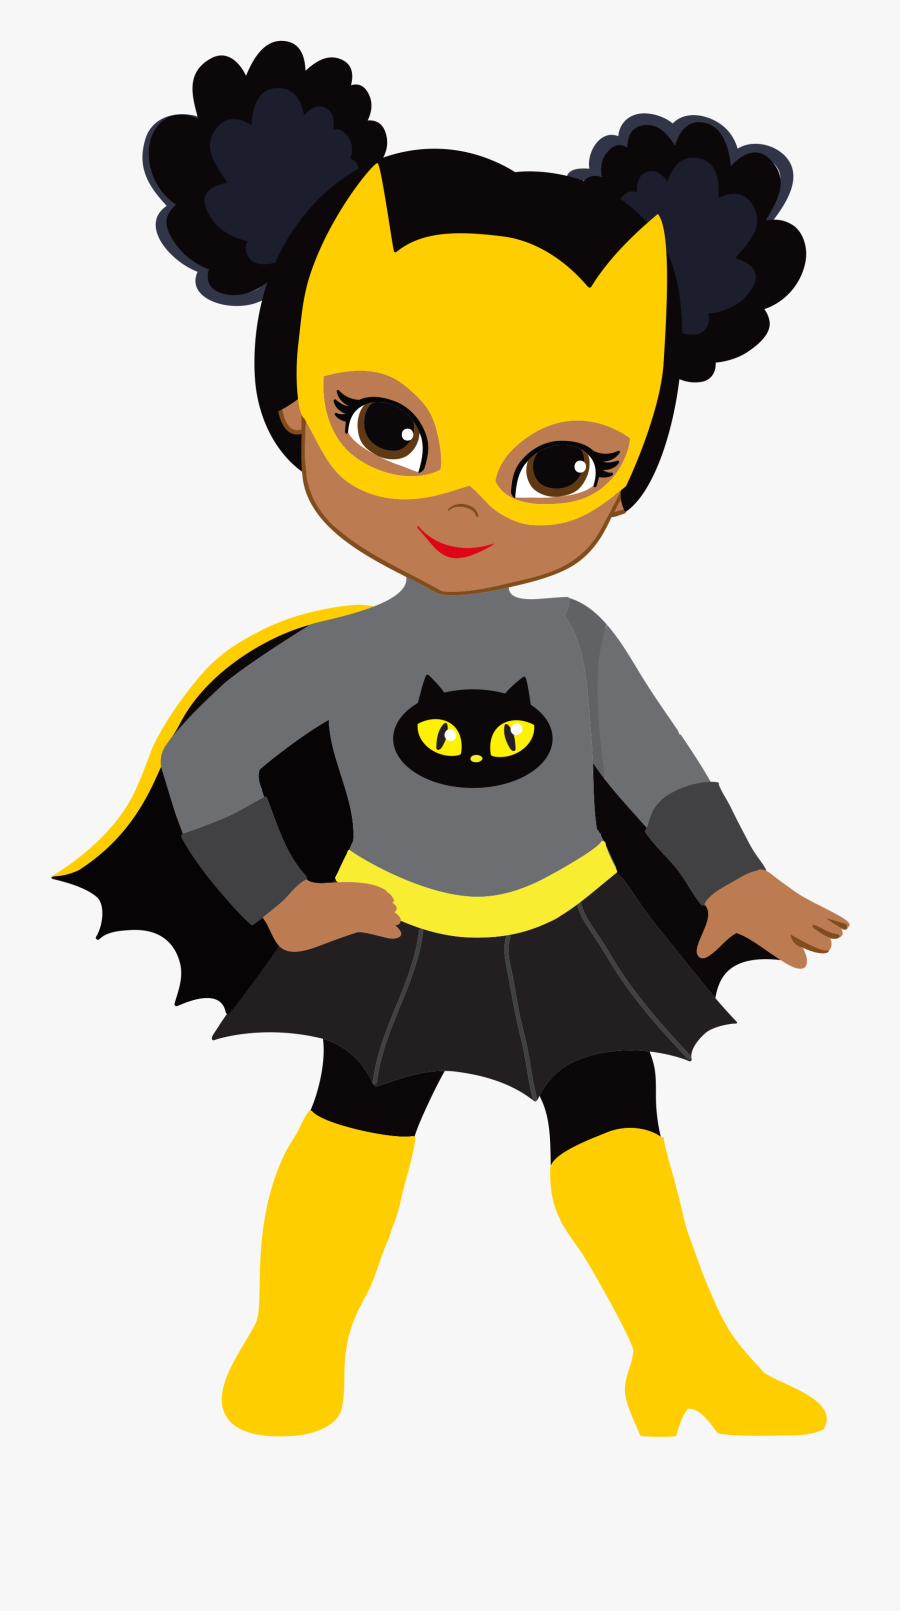 Learning Clipart Gifted Student - Batgirl Clipart, Transparent Clipart